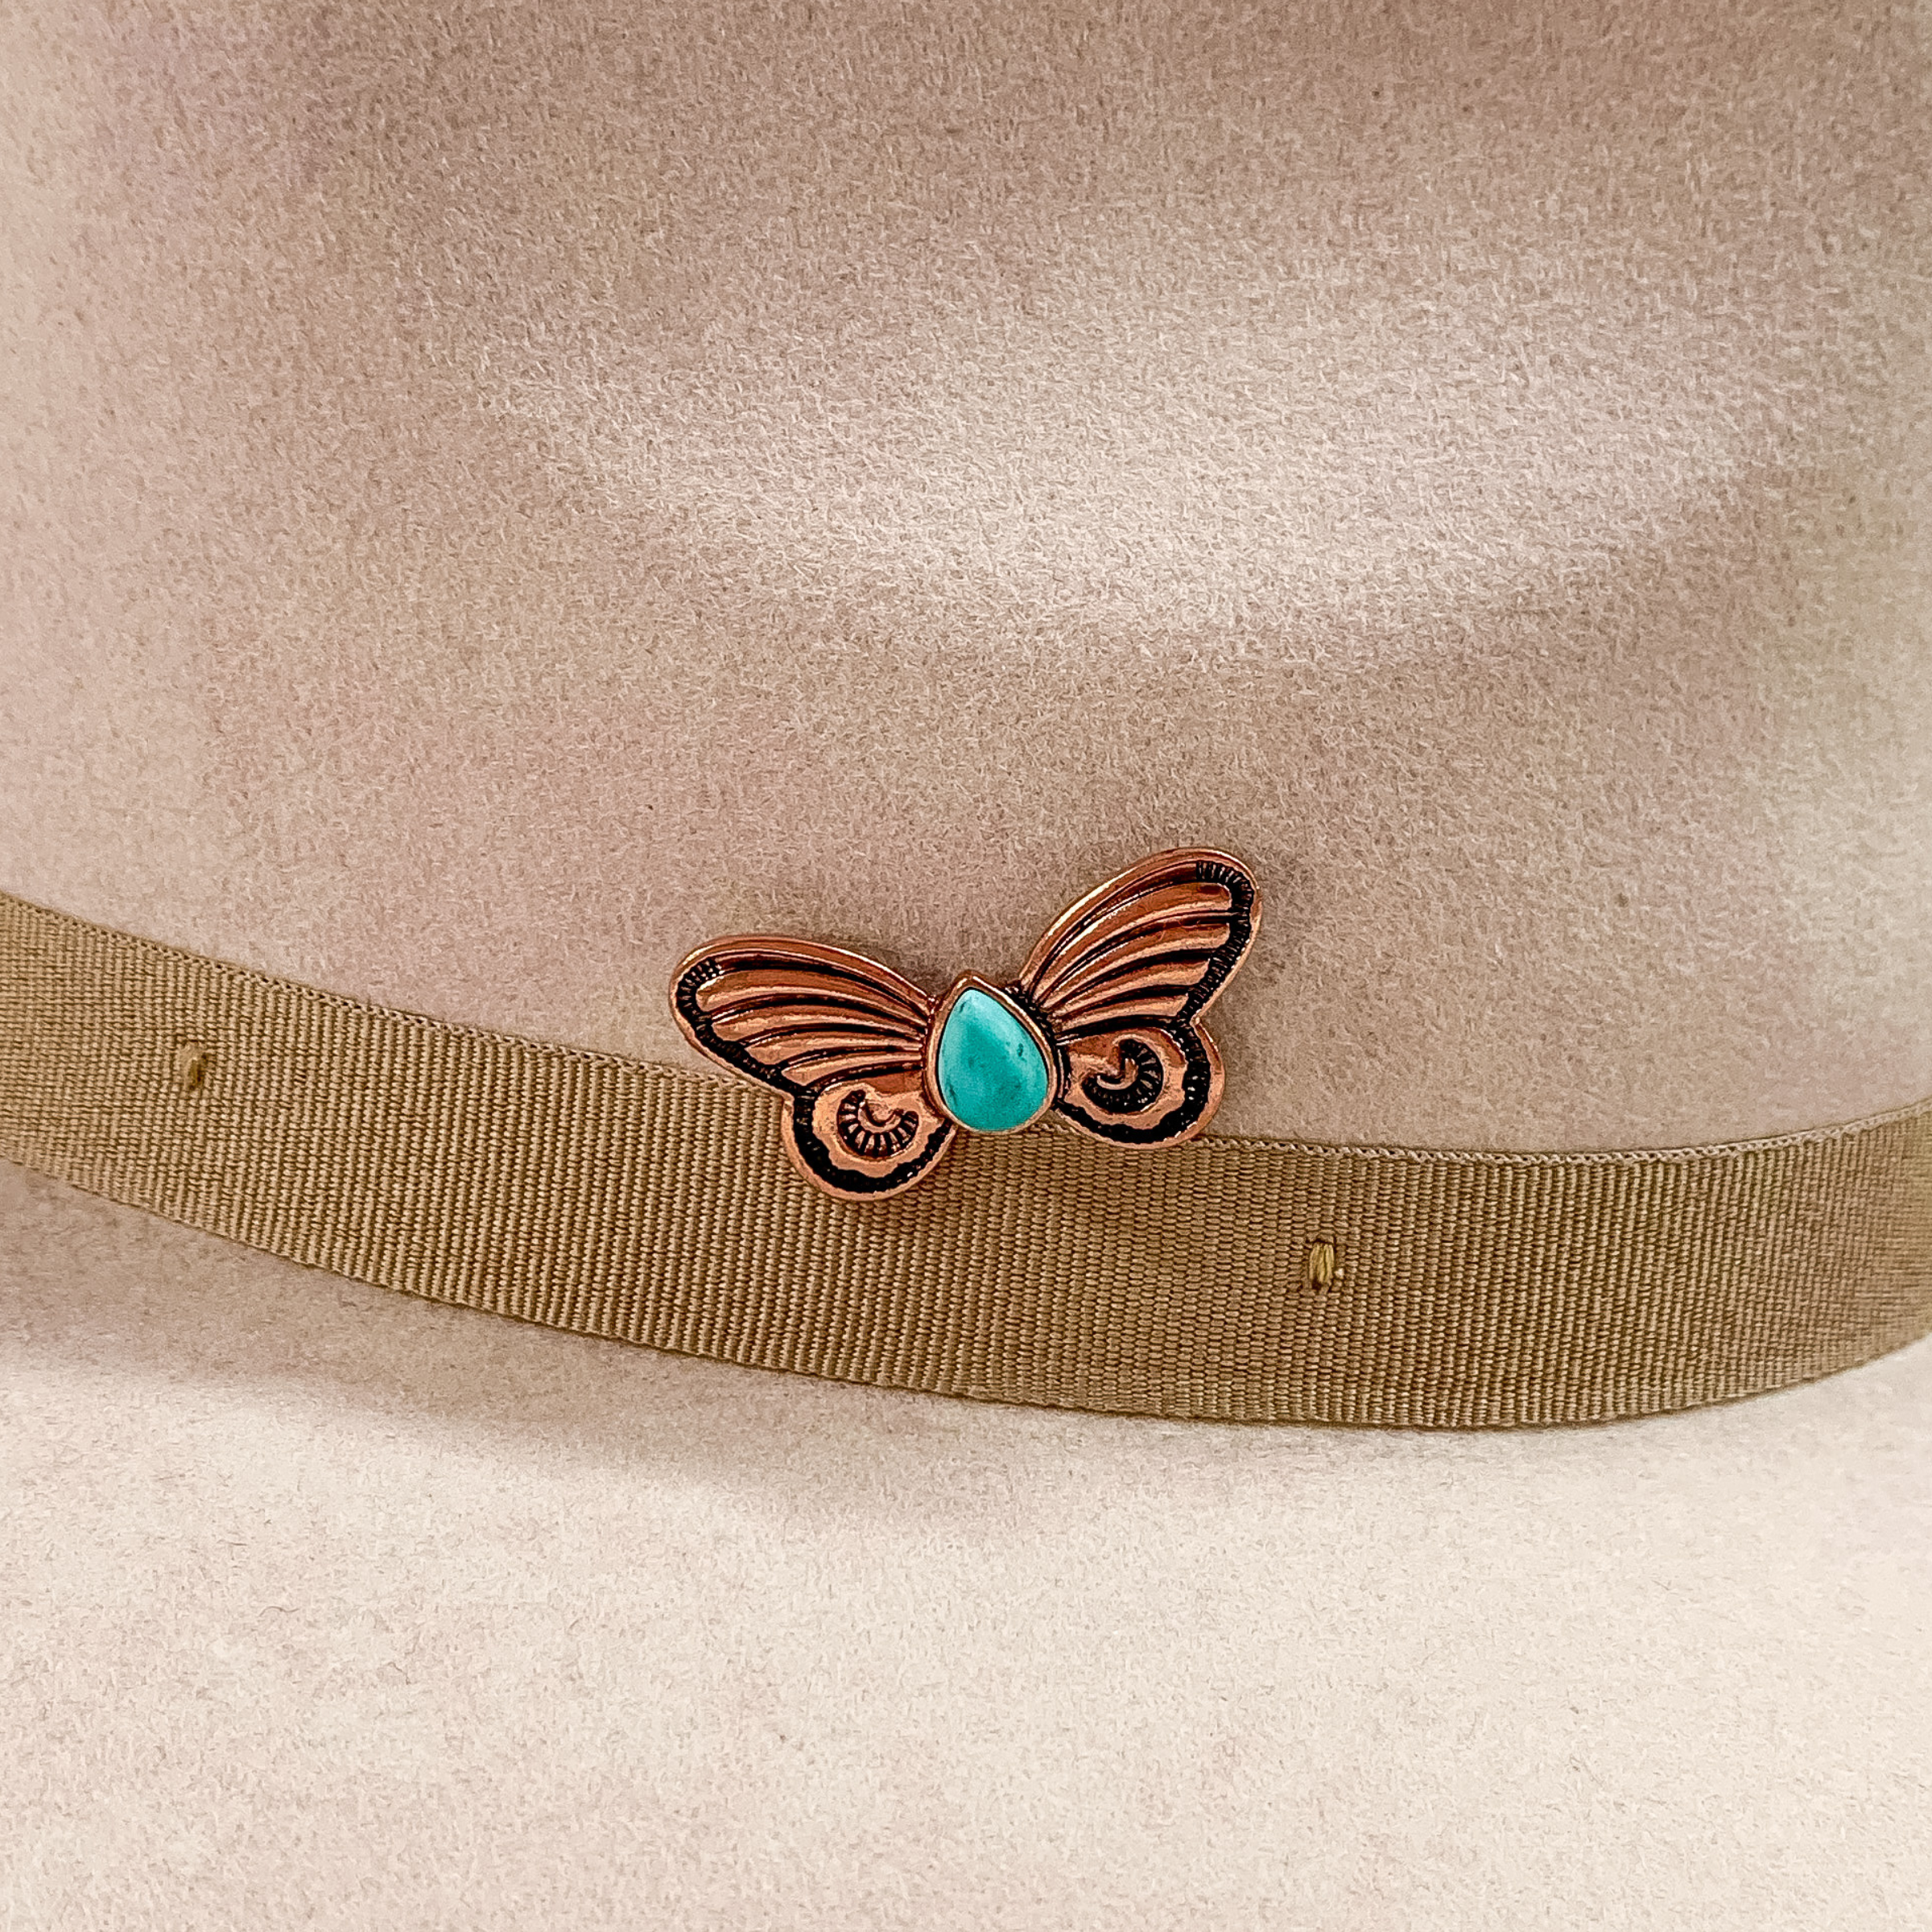 Copper butterfly hat pin with a center, teardrop, turquoise stone pictured on a beige colored hat pictured on a white background.